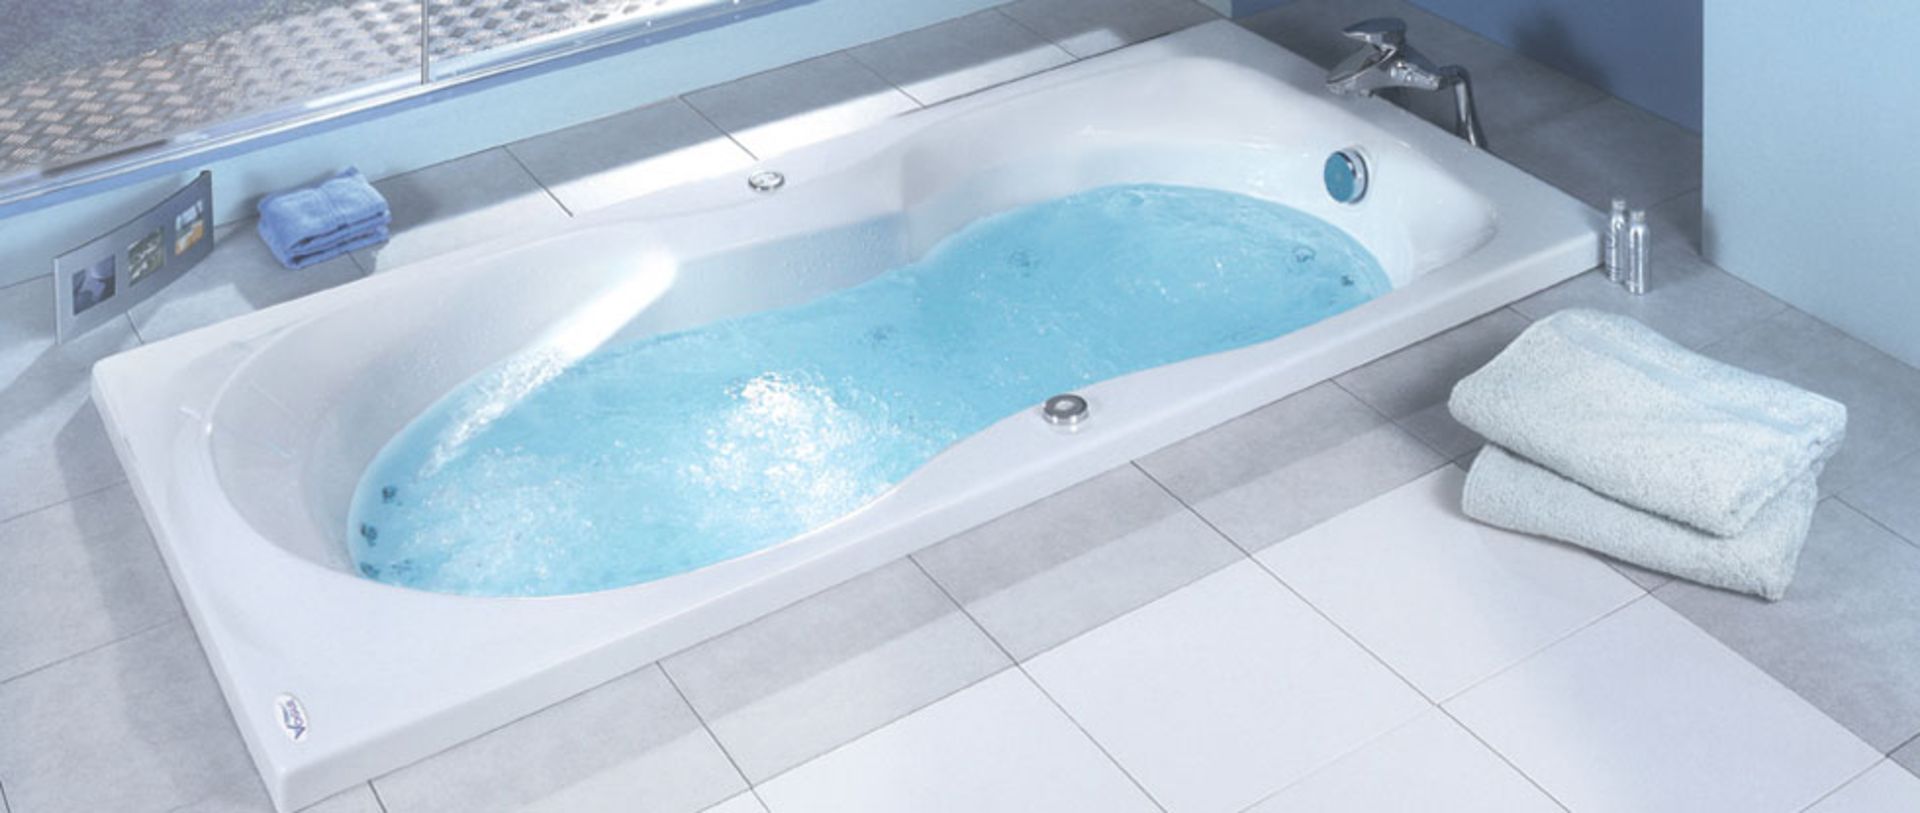 1 x Vogue Bathrooms Sapphire Double Ended Inset Bath Tub - Size: 1800 x 900mm - For The Ultimate - Image 3 of 5